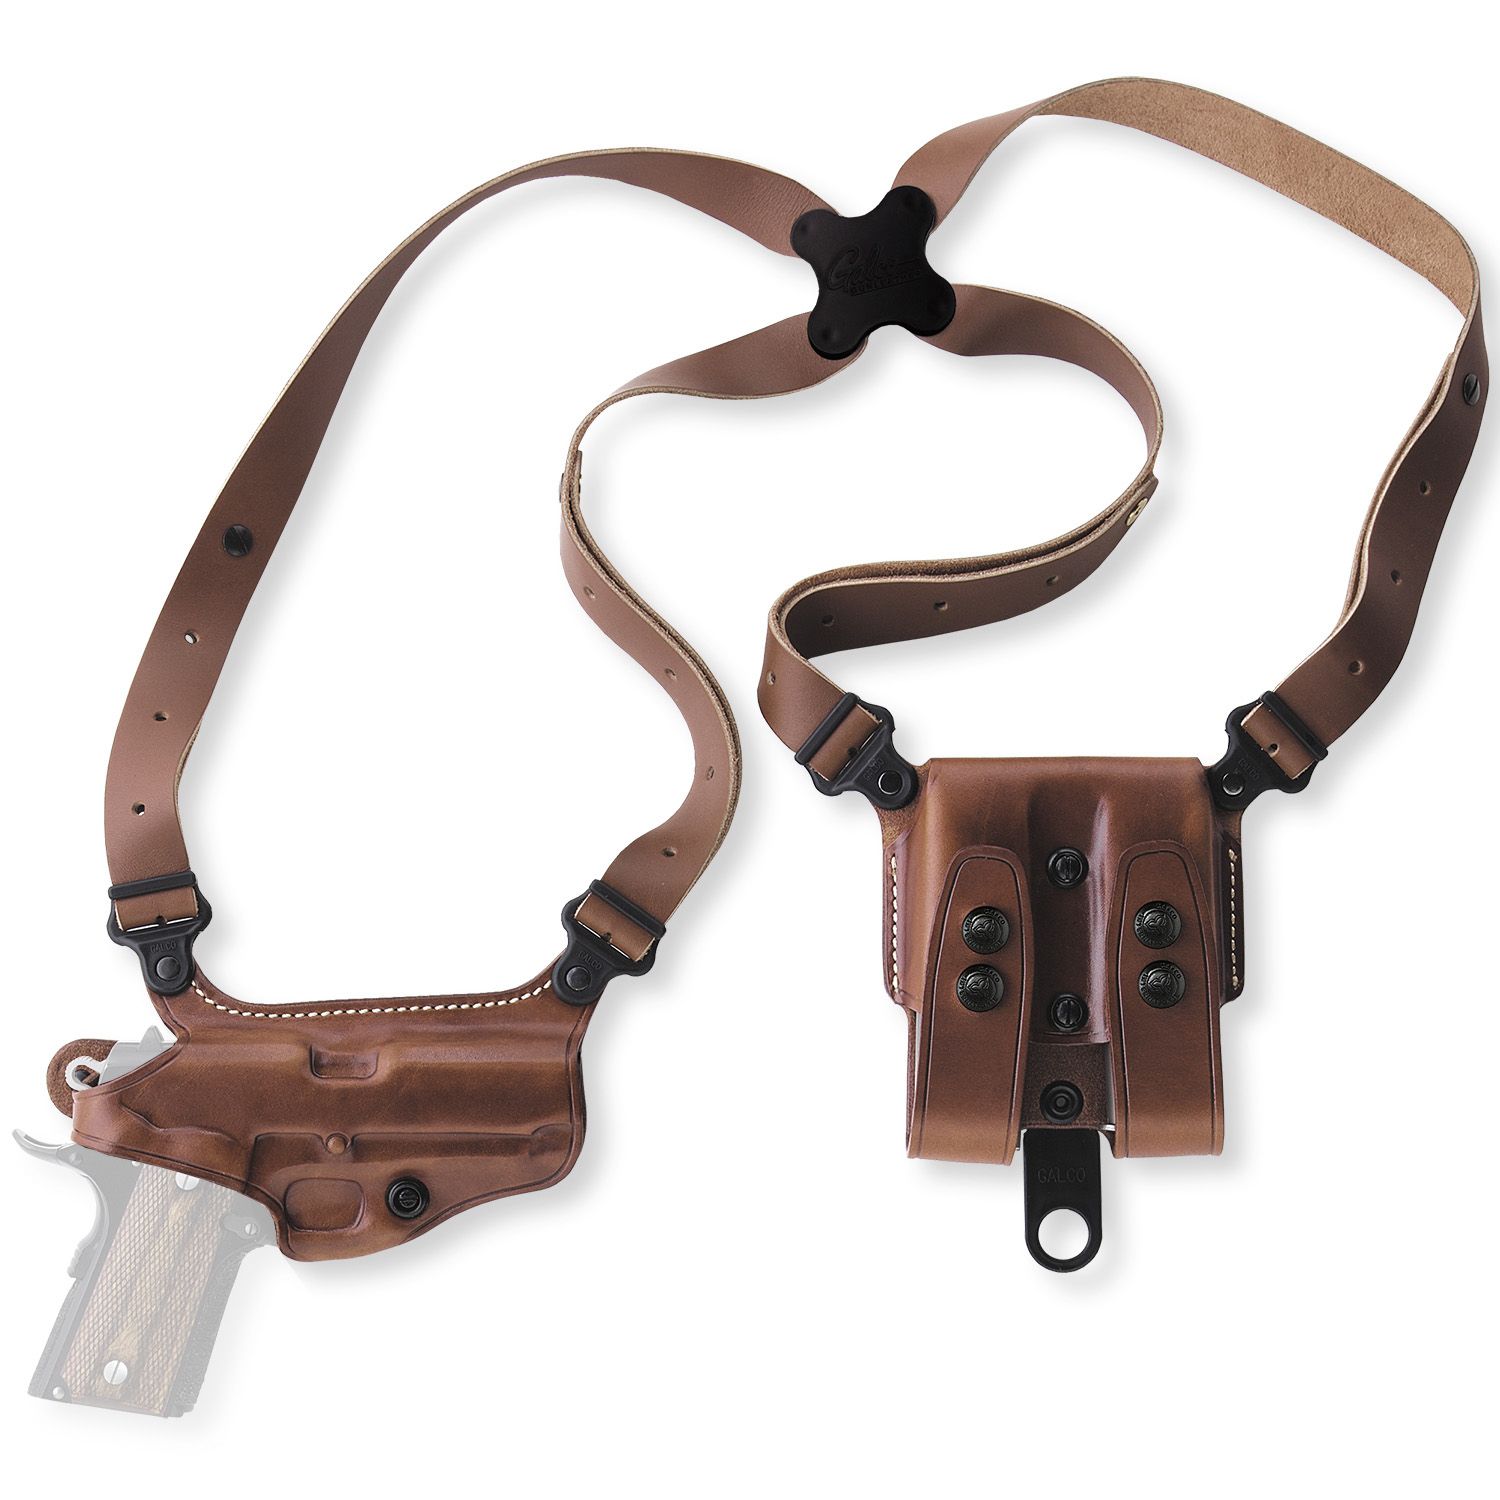 DEMO Galco Miami Classic Shoulder Leather Holster System Tan 5in : MC212-DEMO